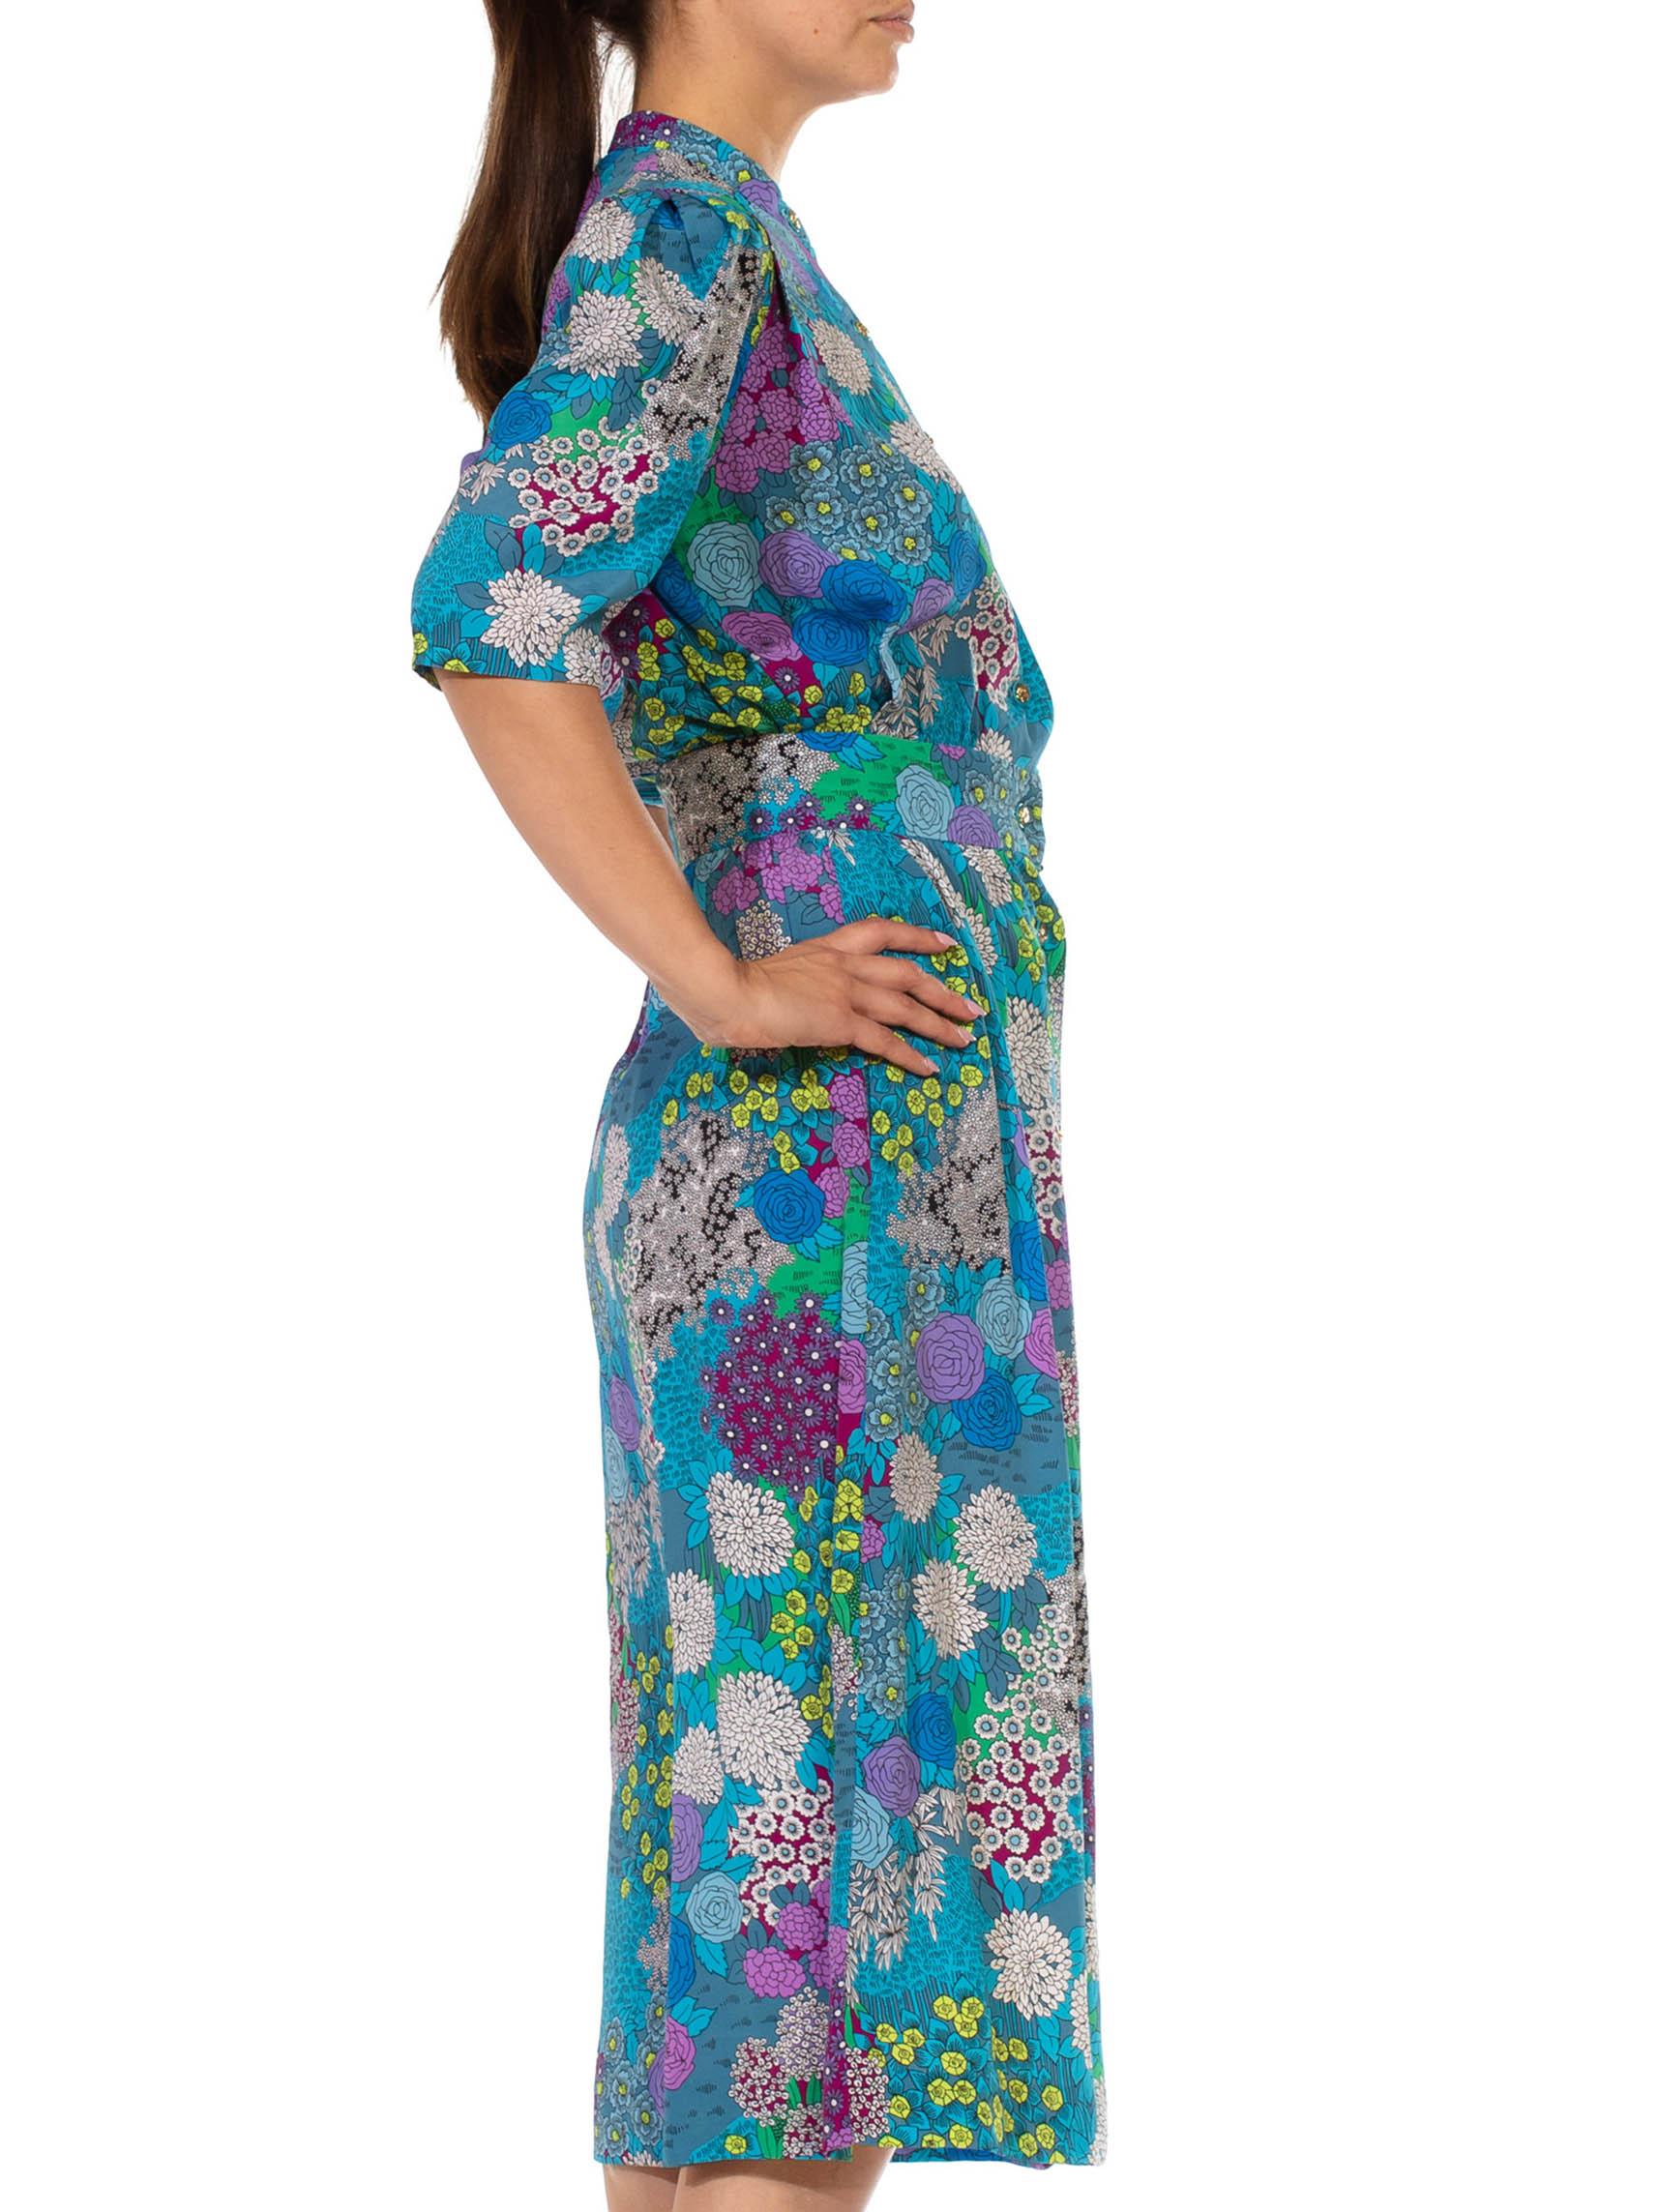 Women's 1970S Blue & Purple Polyester Psychedelic Floral Printed Dress With Hidden Skir For Sale